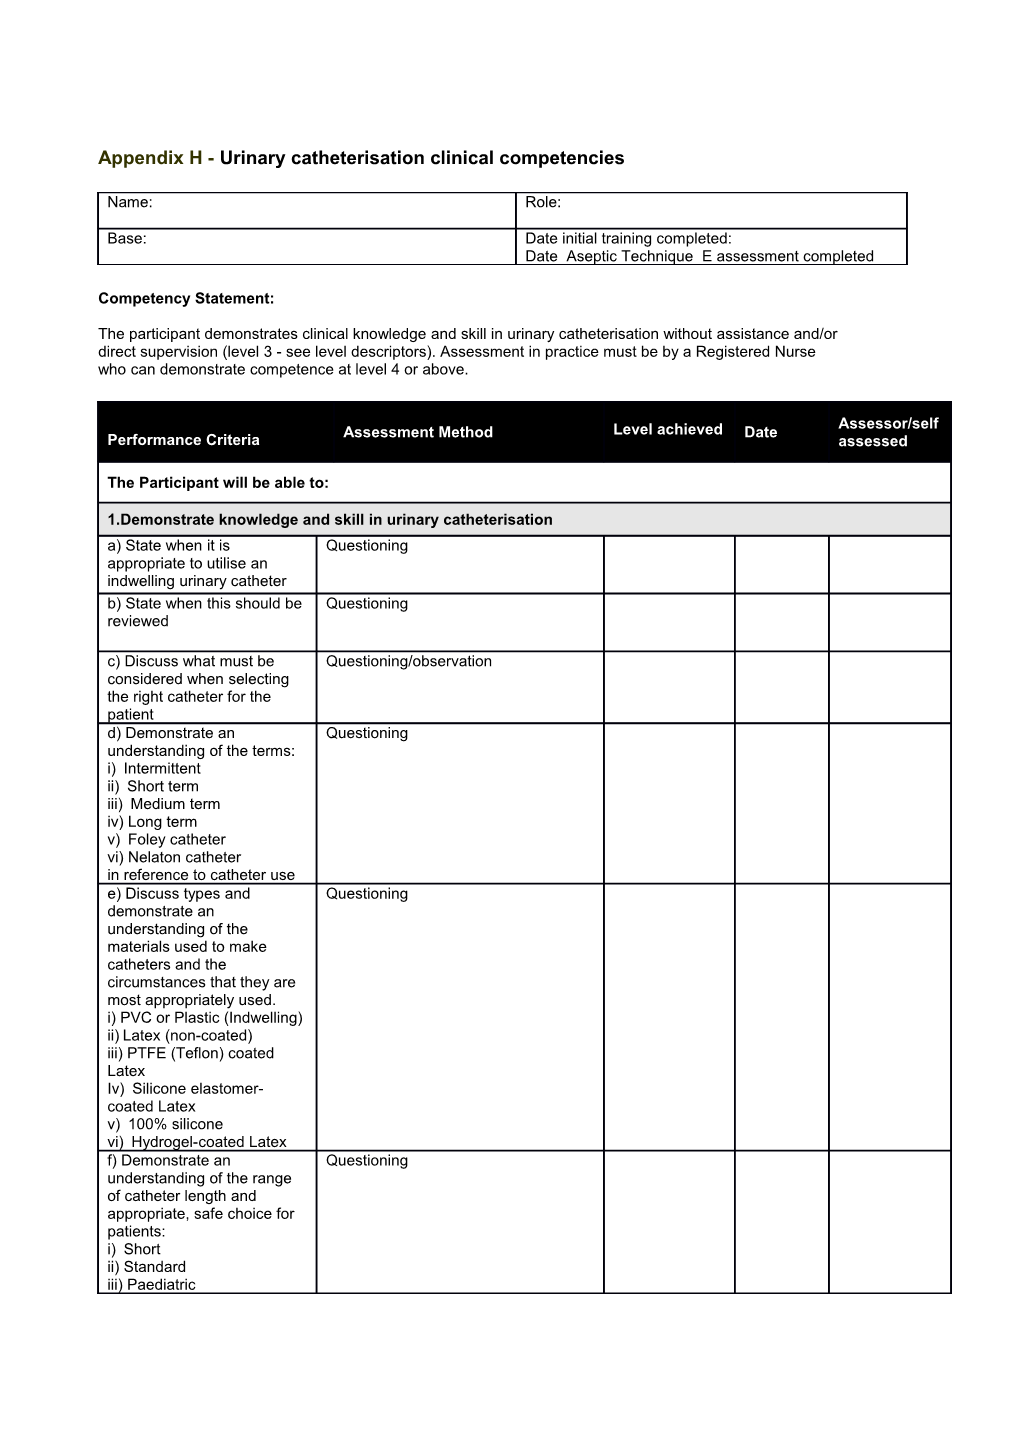 Appendix H - Urinary Catheterisation Clinical Competencies